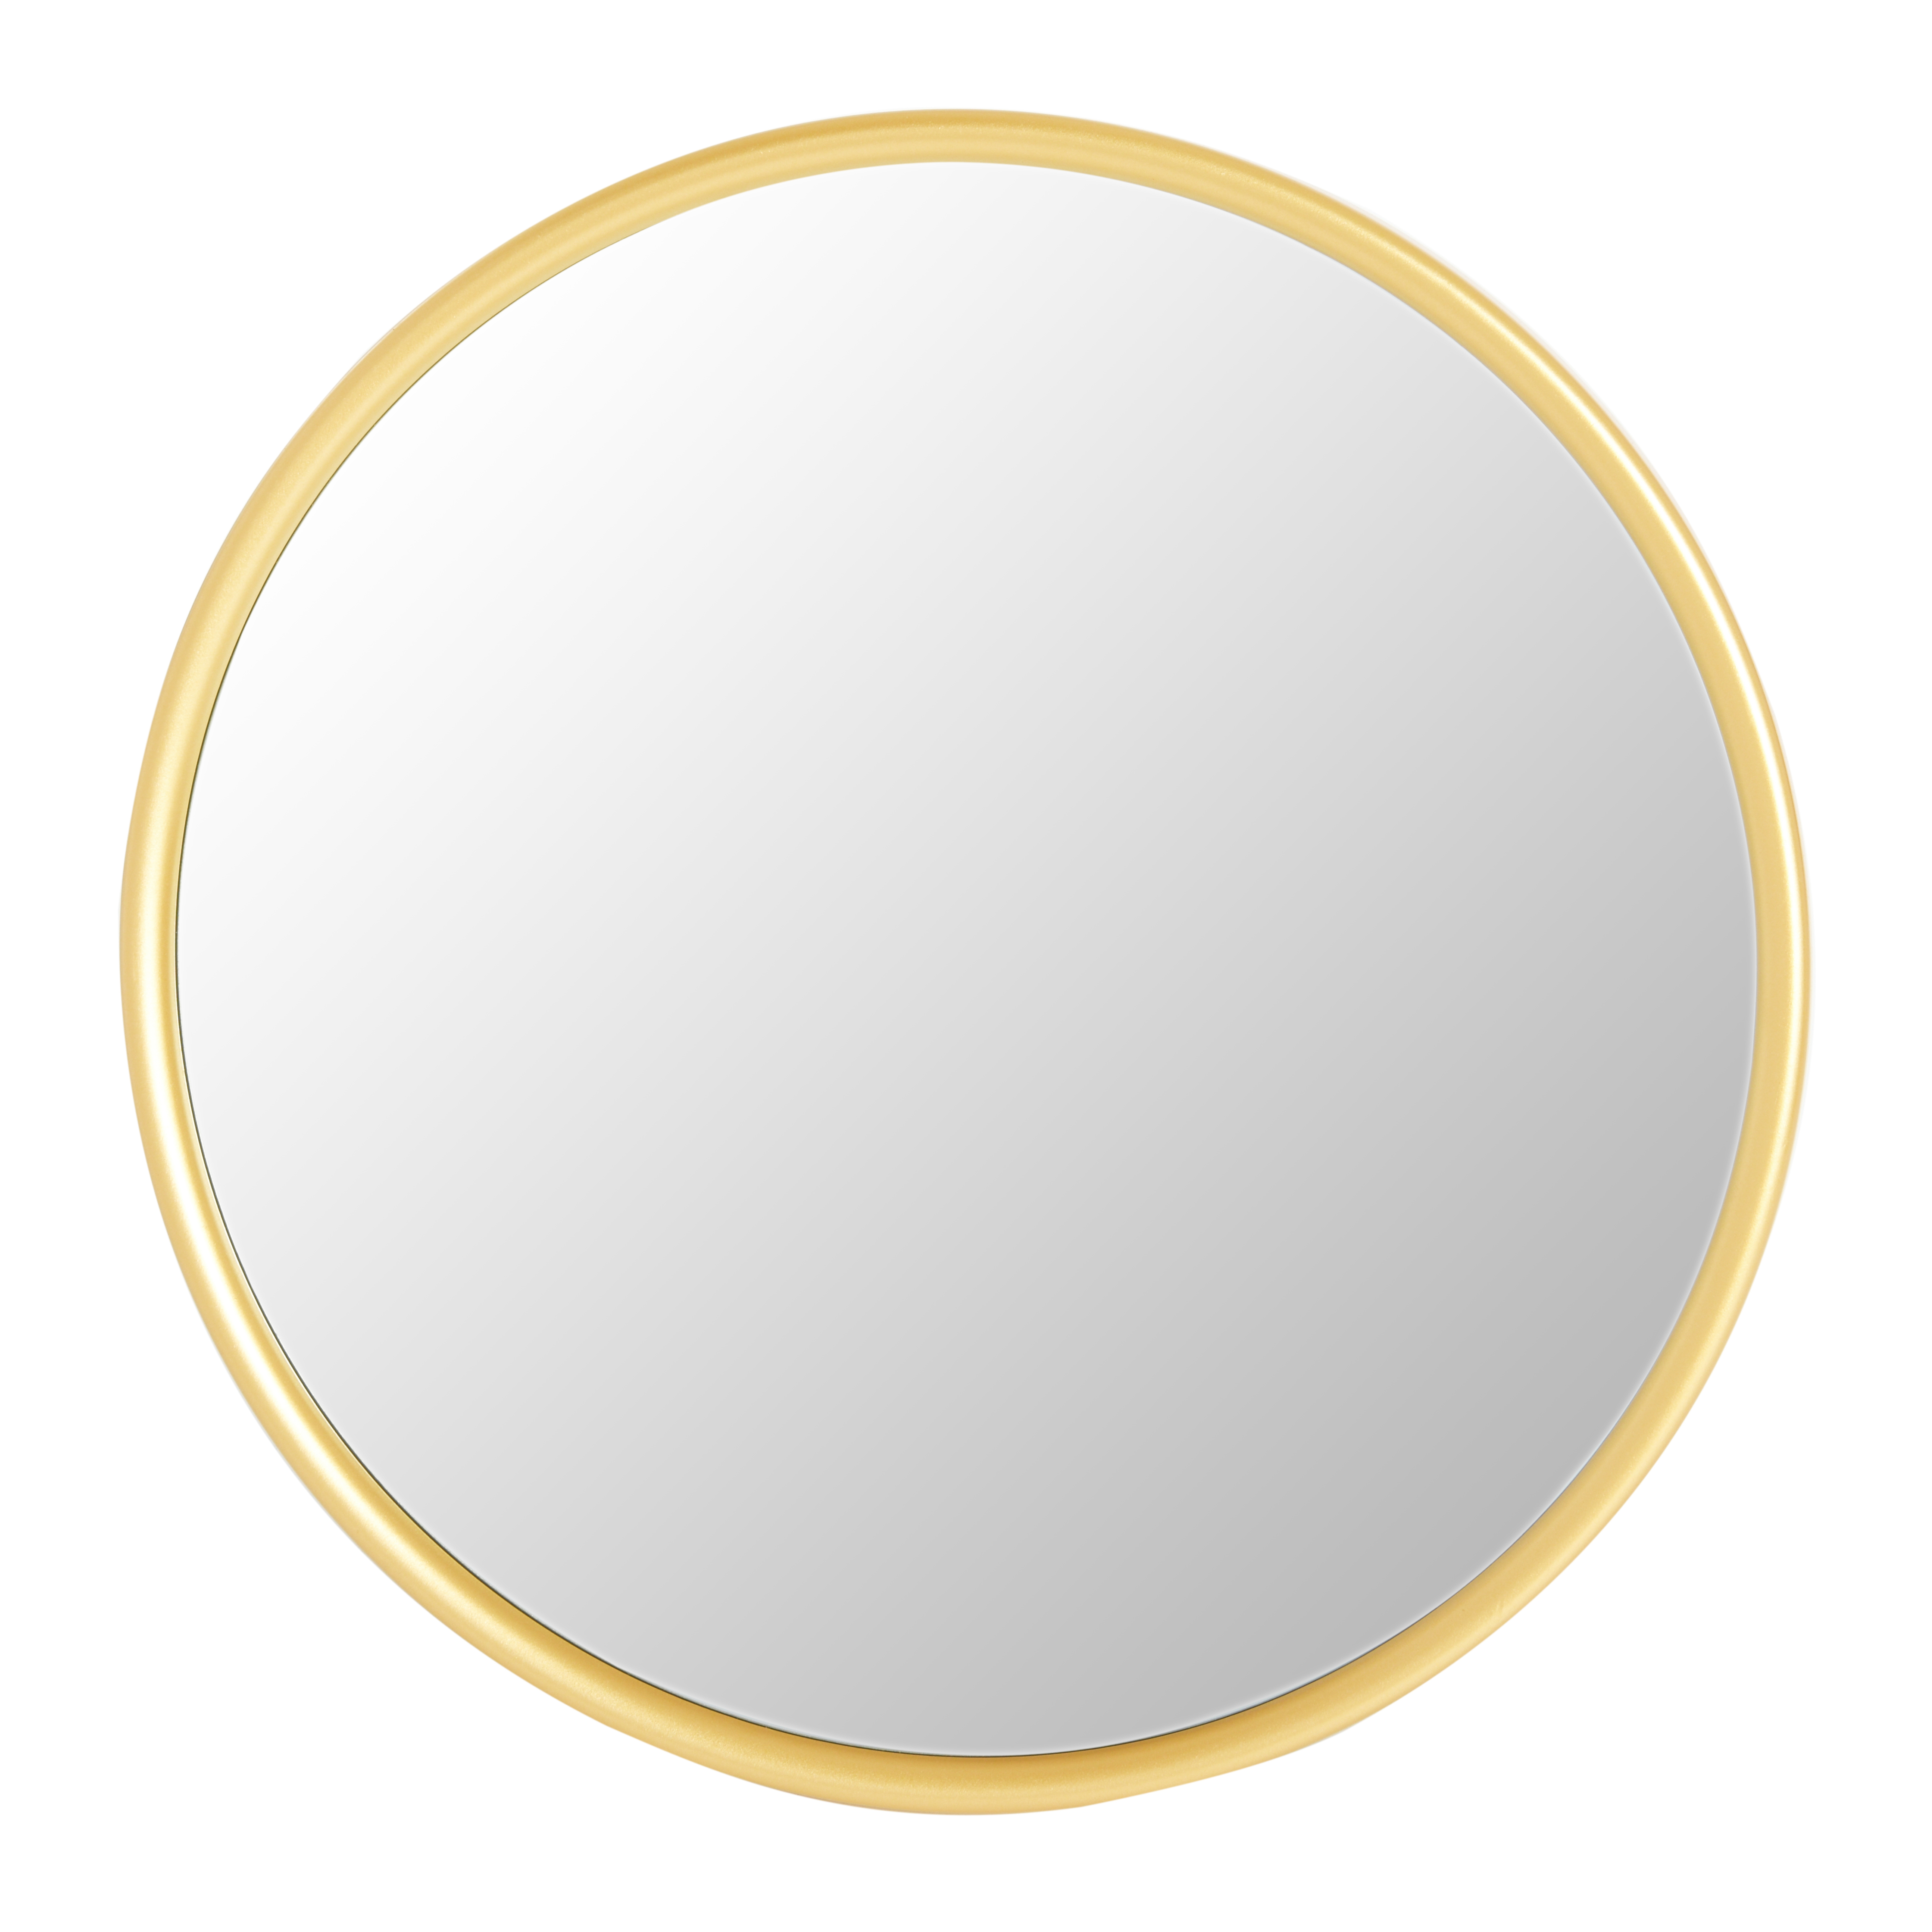 Round Metal Wall Mirror, Gold Finish - Nomad Home